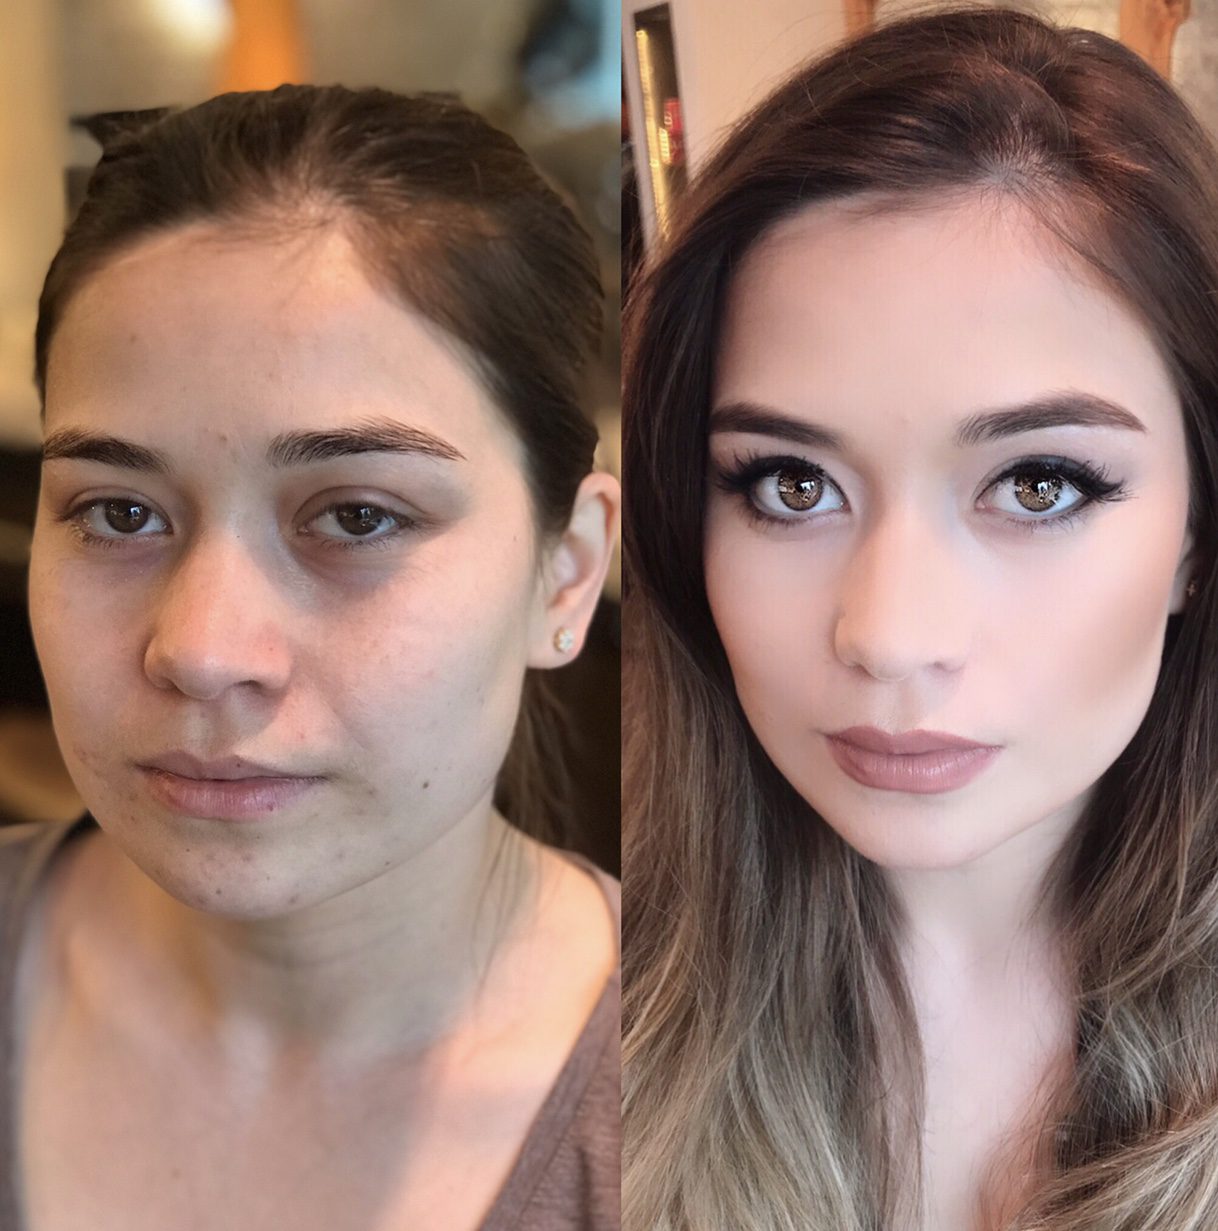 Portraits of a person’s bare face and with makeup